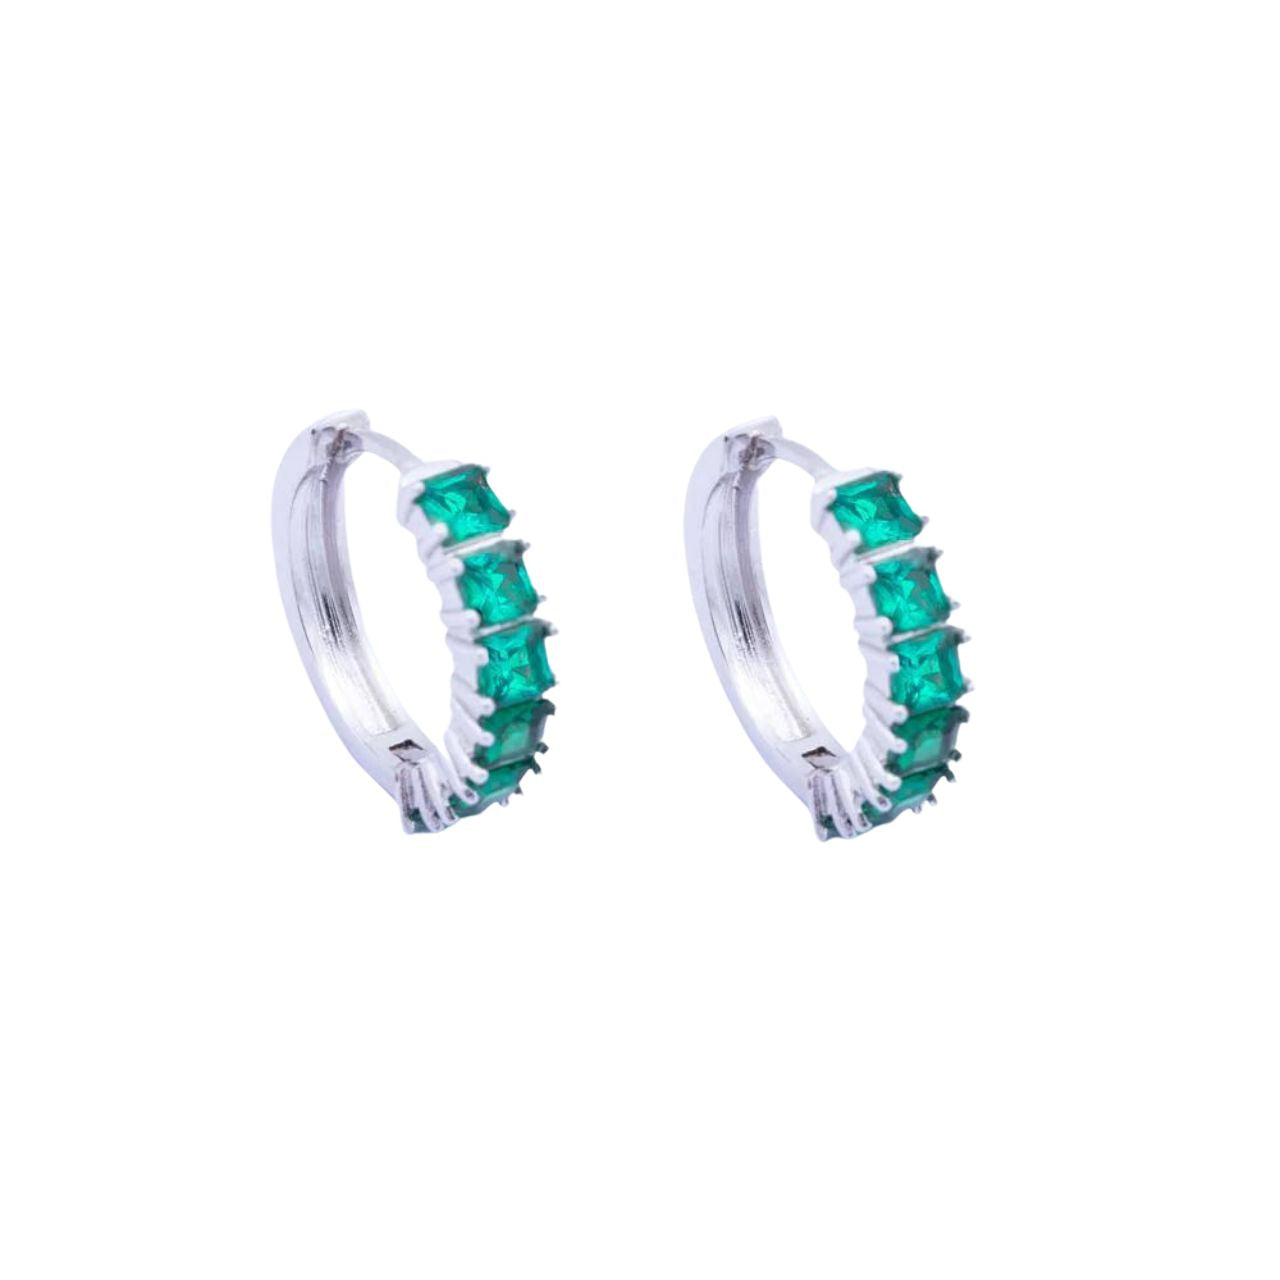 Knight & Day Classic Emerald Hoops Earrings   Classic style hoops embellished with emerald CZ stones. Rhodium plating.